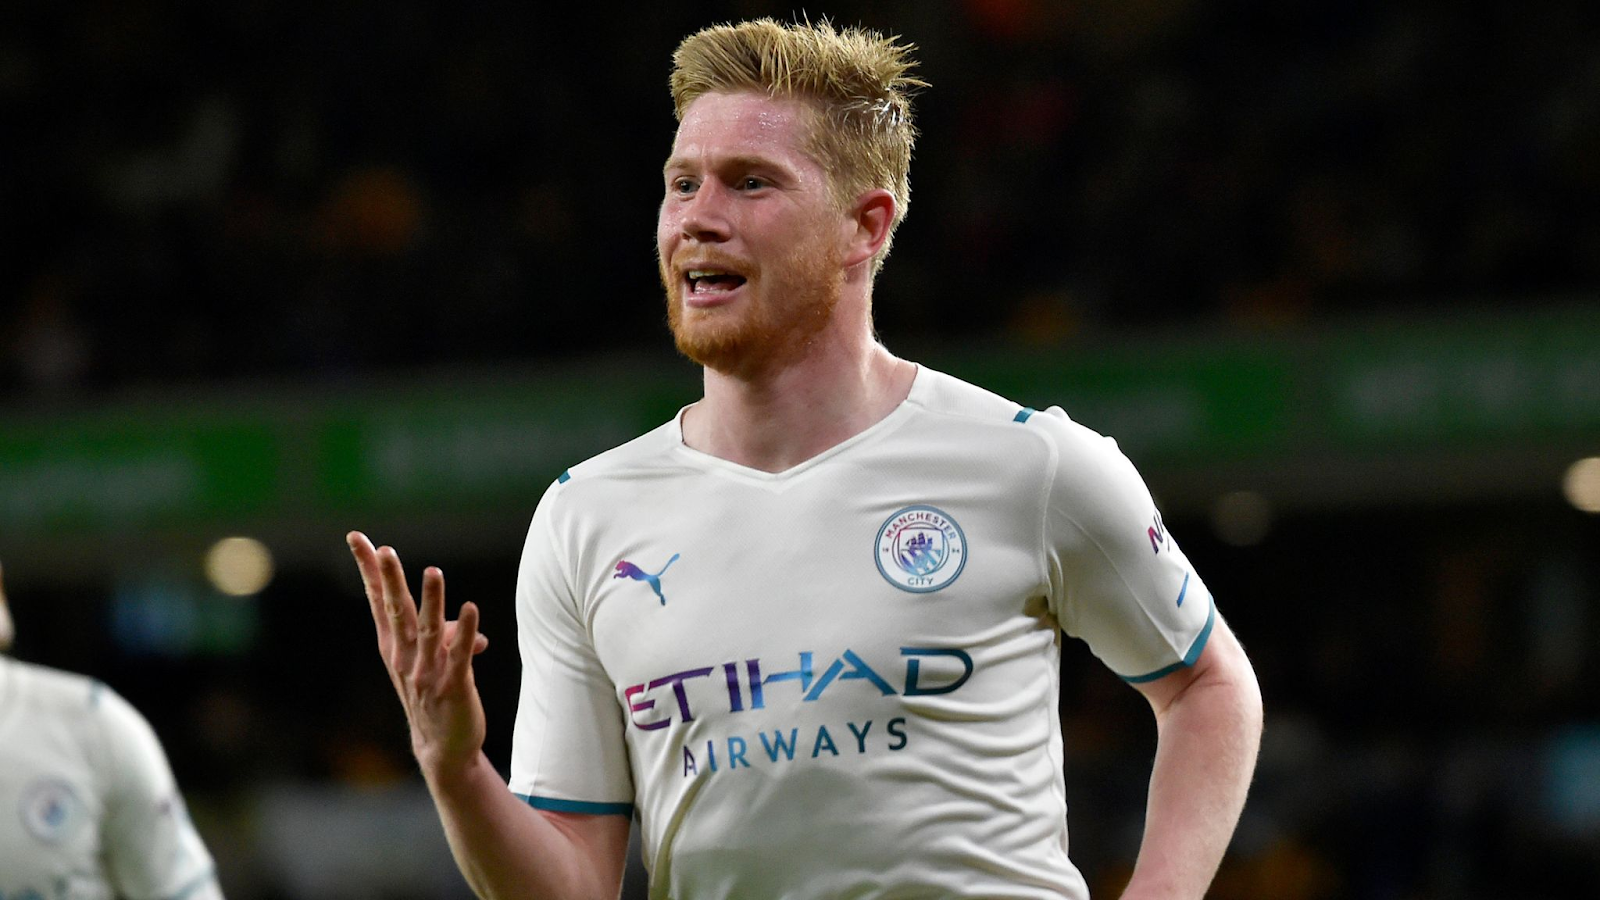 Kevin De Bruyne scored four goals as Manchester City defeated Wolverhampton Wanderers